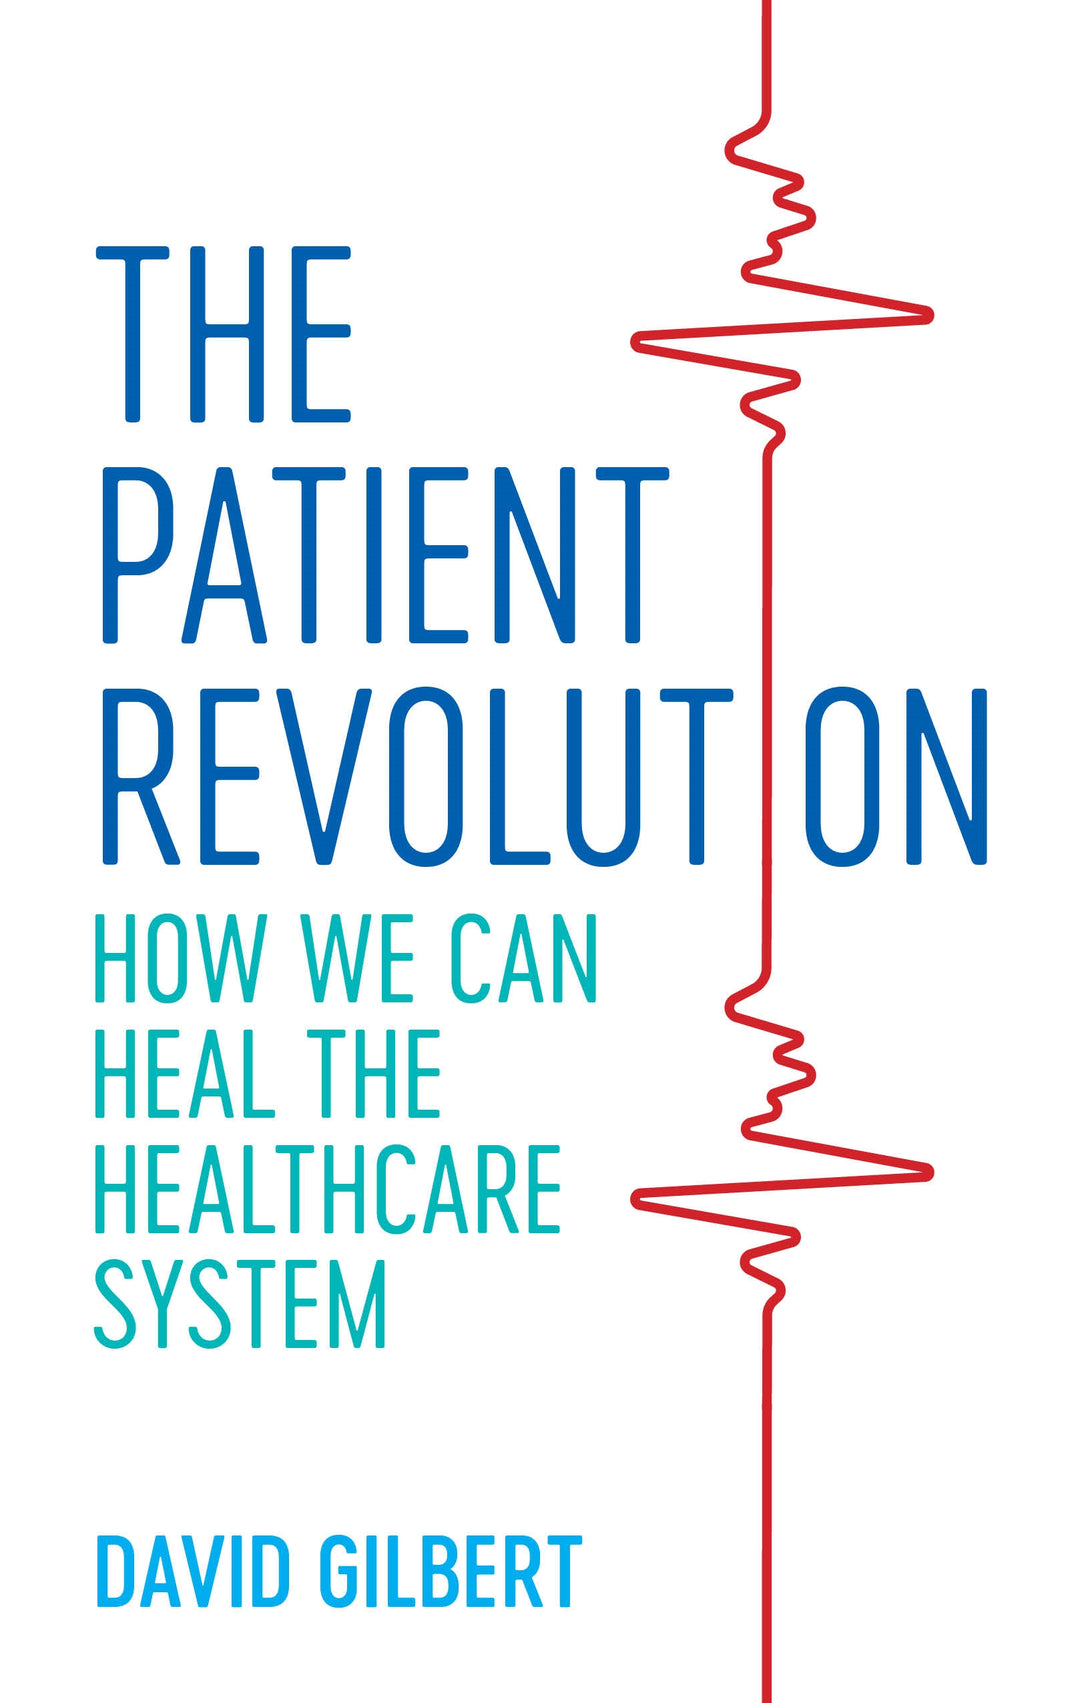 The Patient Revolution by David Gilbert